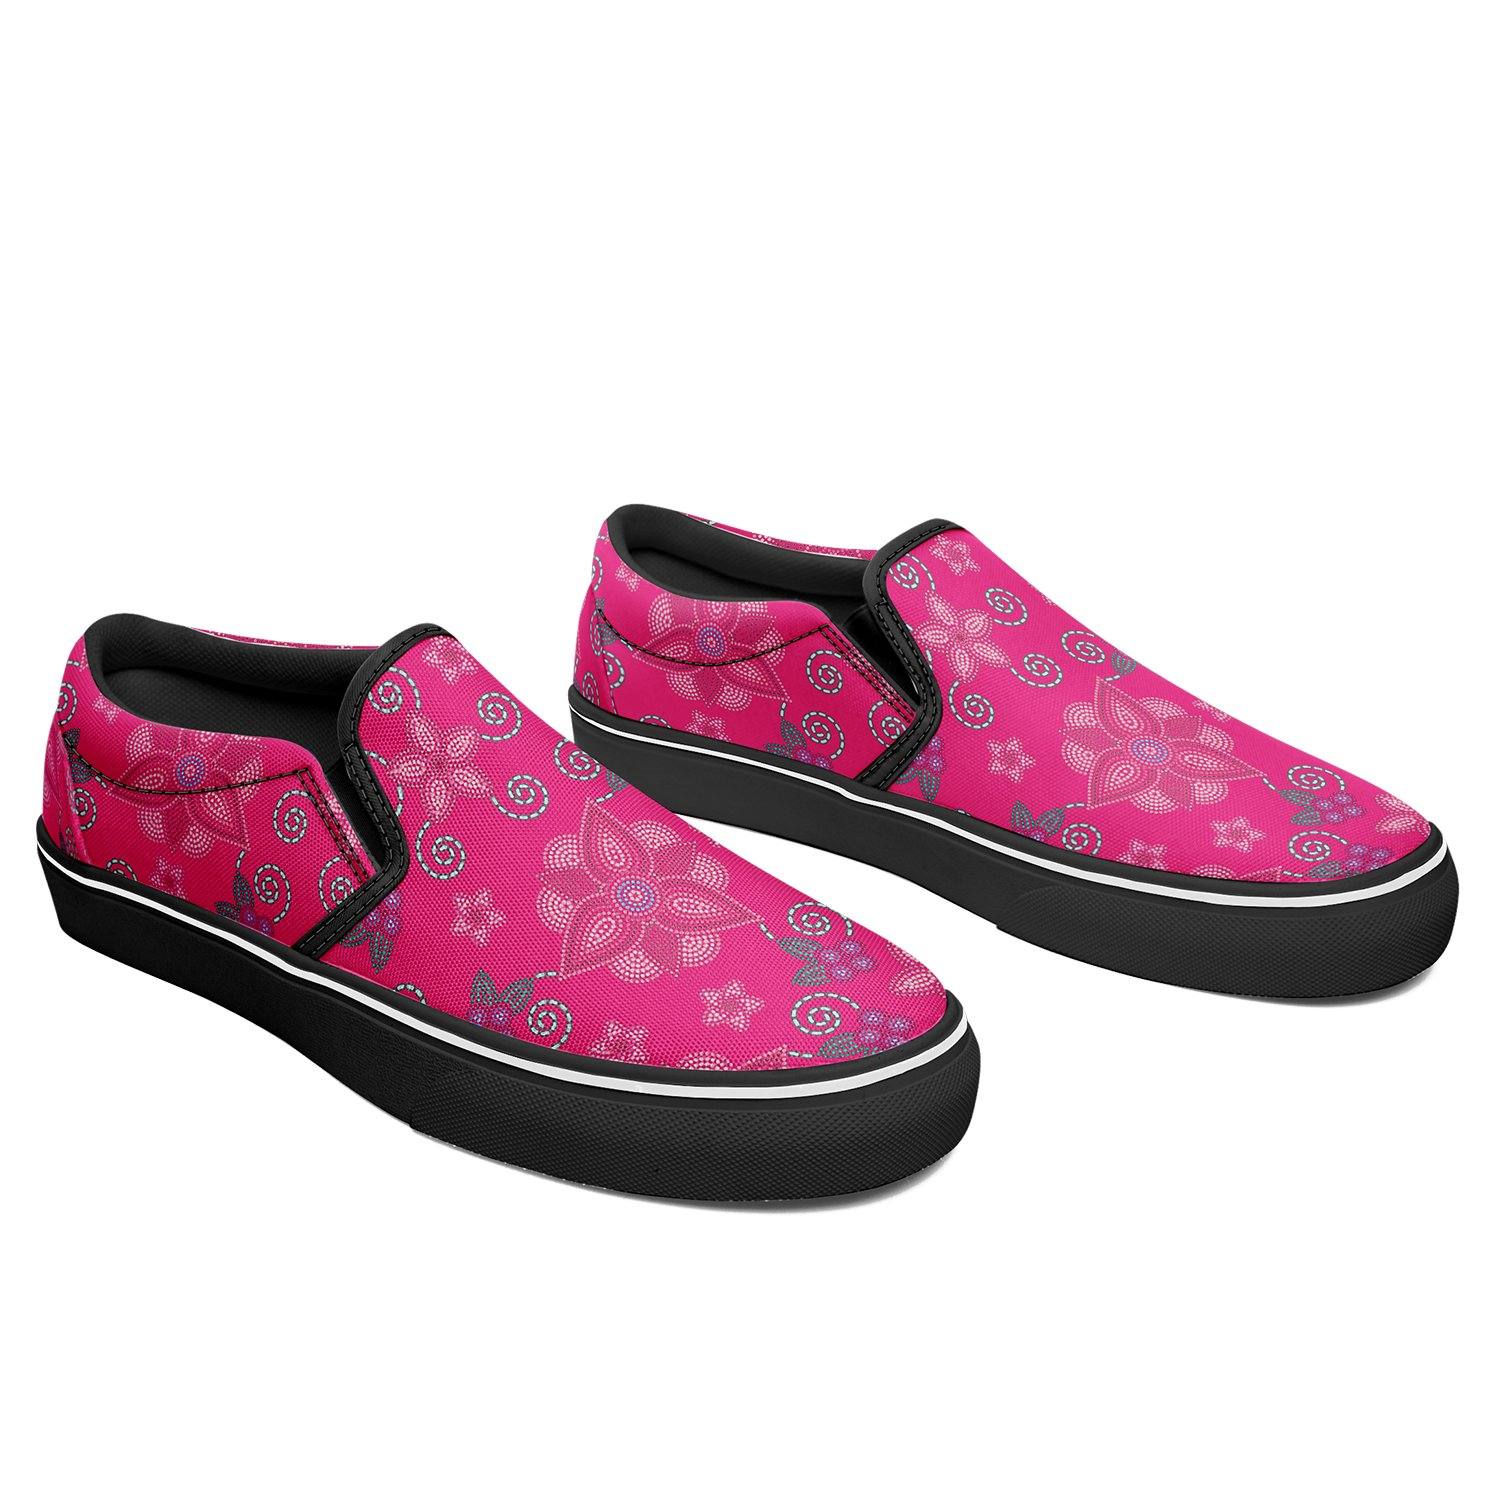 Berry Picking Pink Otoyimm Kid's Canvas Slip On Shoes otoyimm Herman 